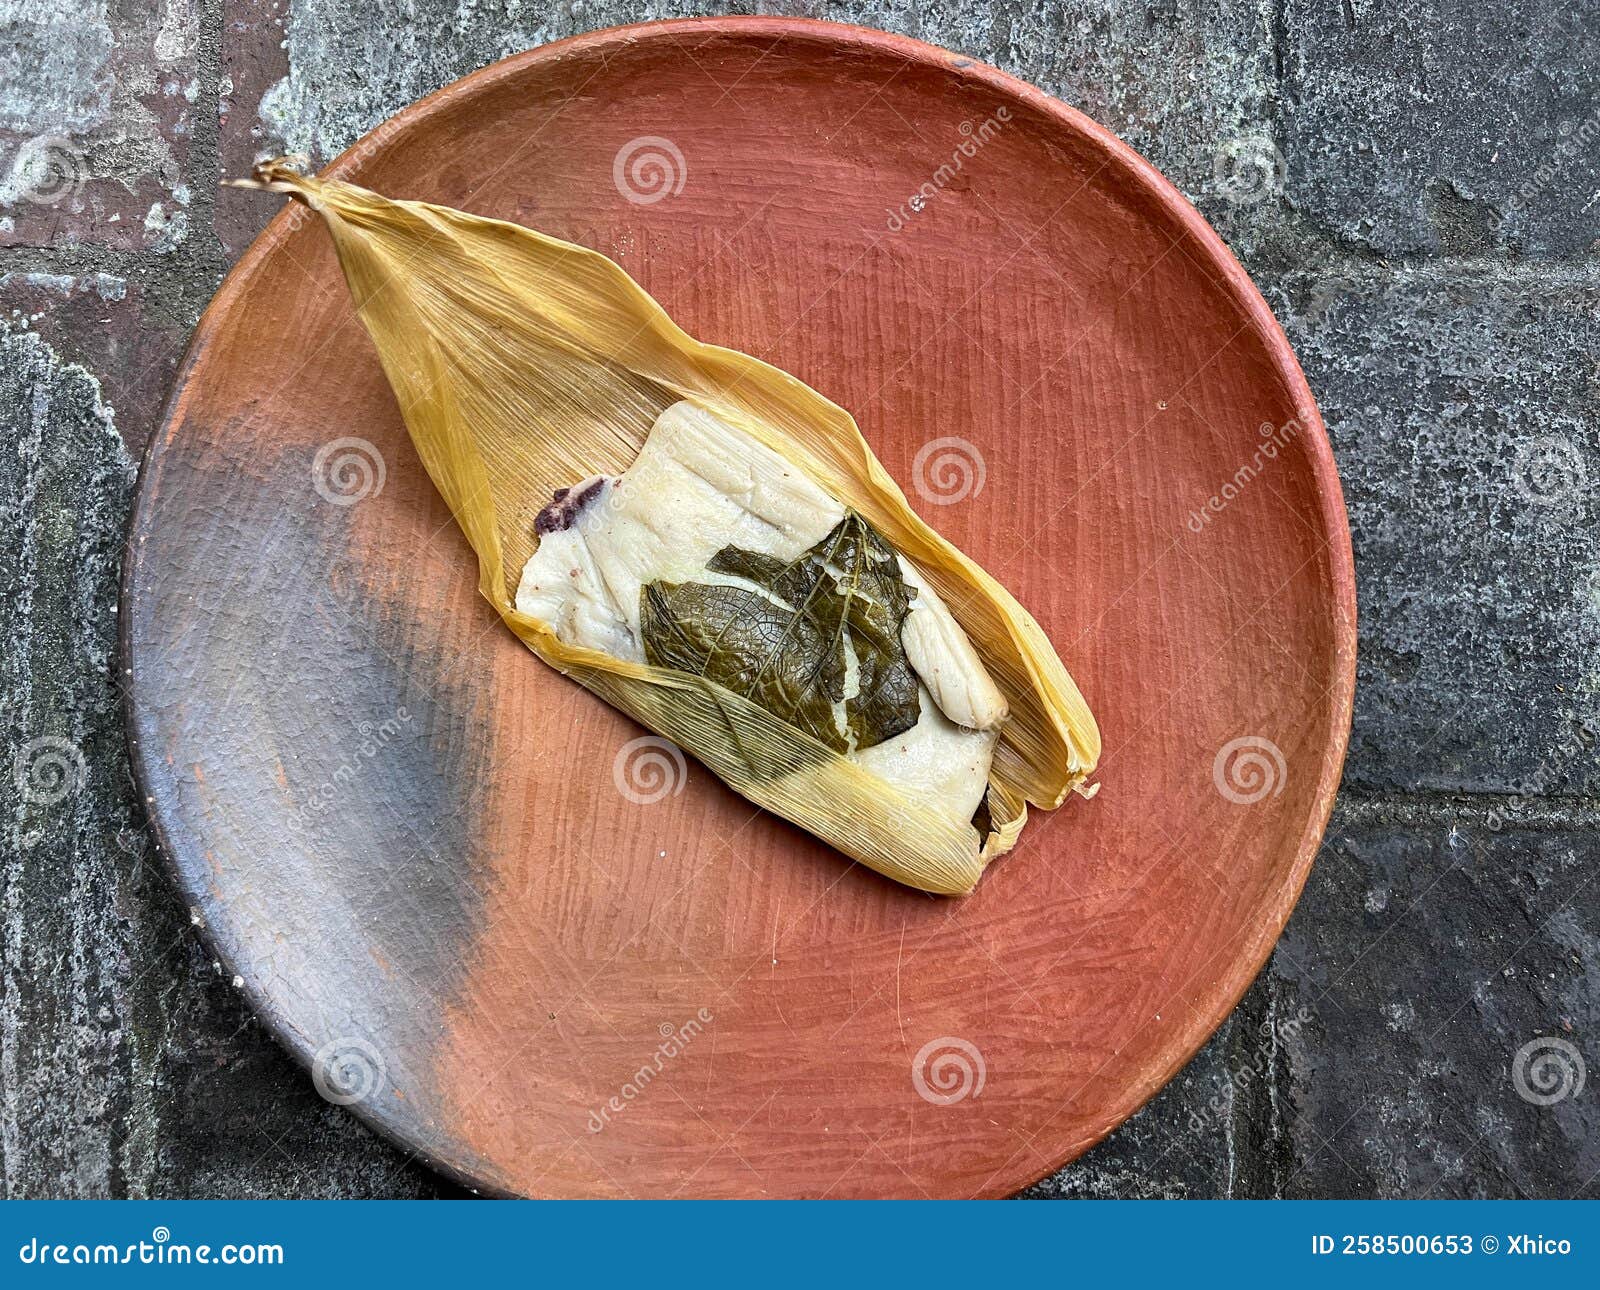 one oaxacan tamale with hoja santa wrapped on the outside of the masa